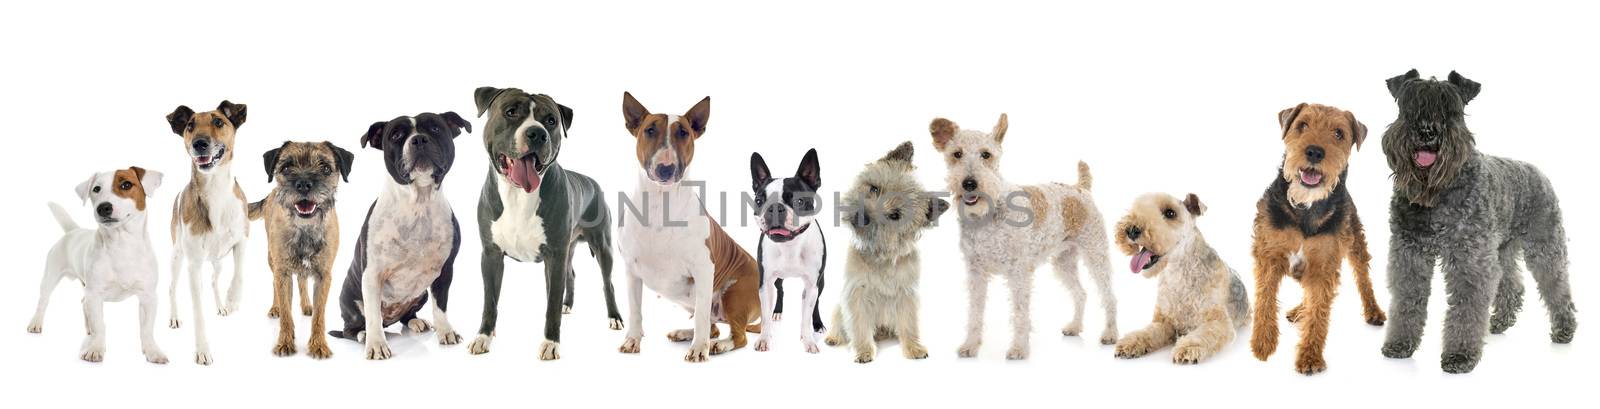 group of terrier by cynoclub